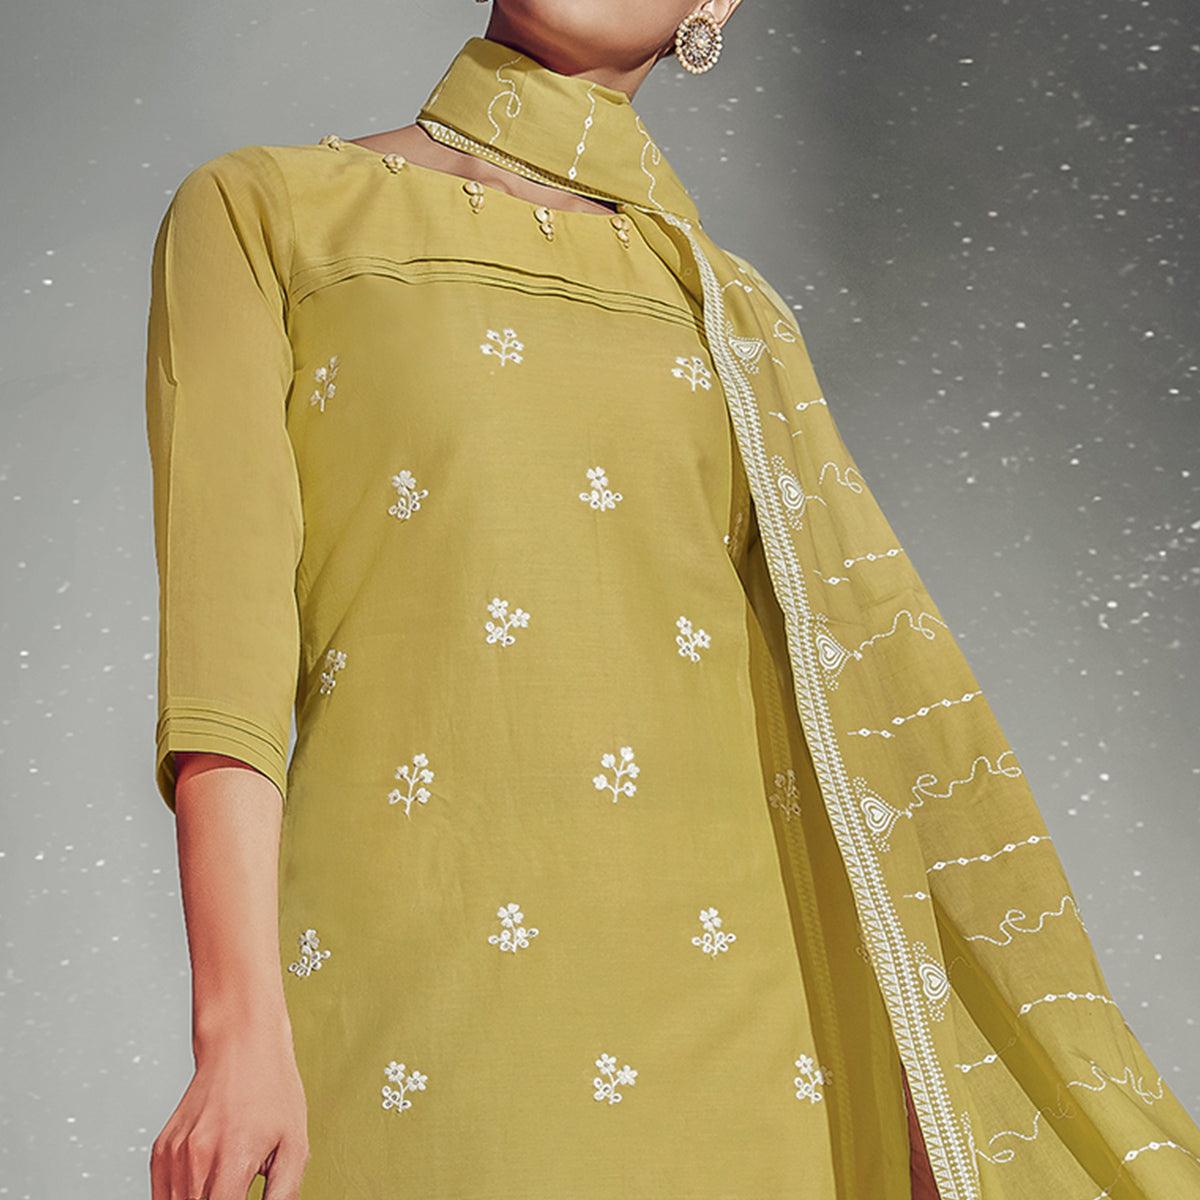 Eye-catching Olive Green Colored Partywear Embroidered Cotton Kurti-Pant Set With Dupatta - Peachmode